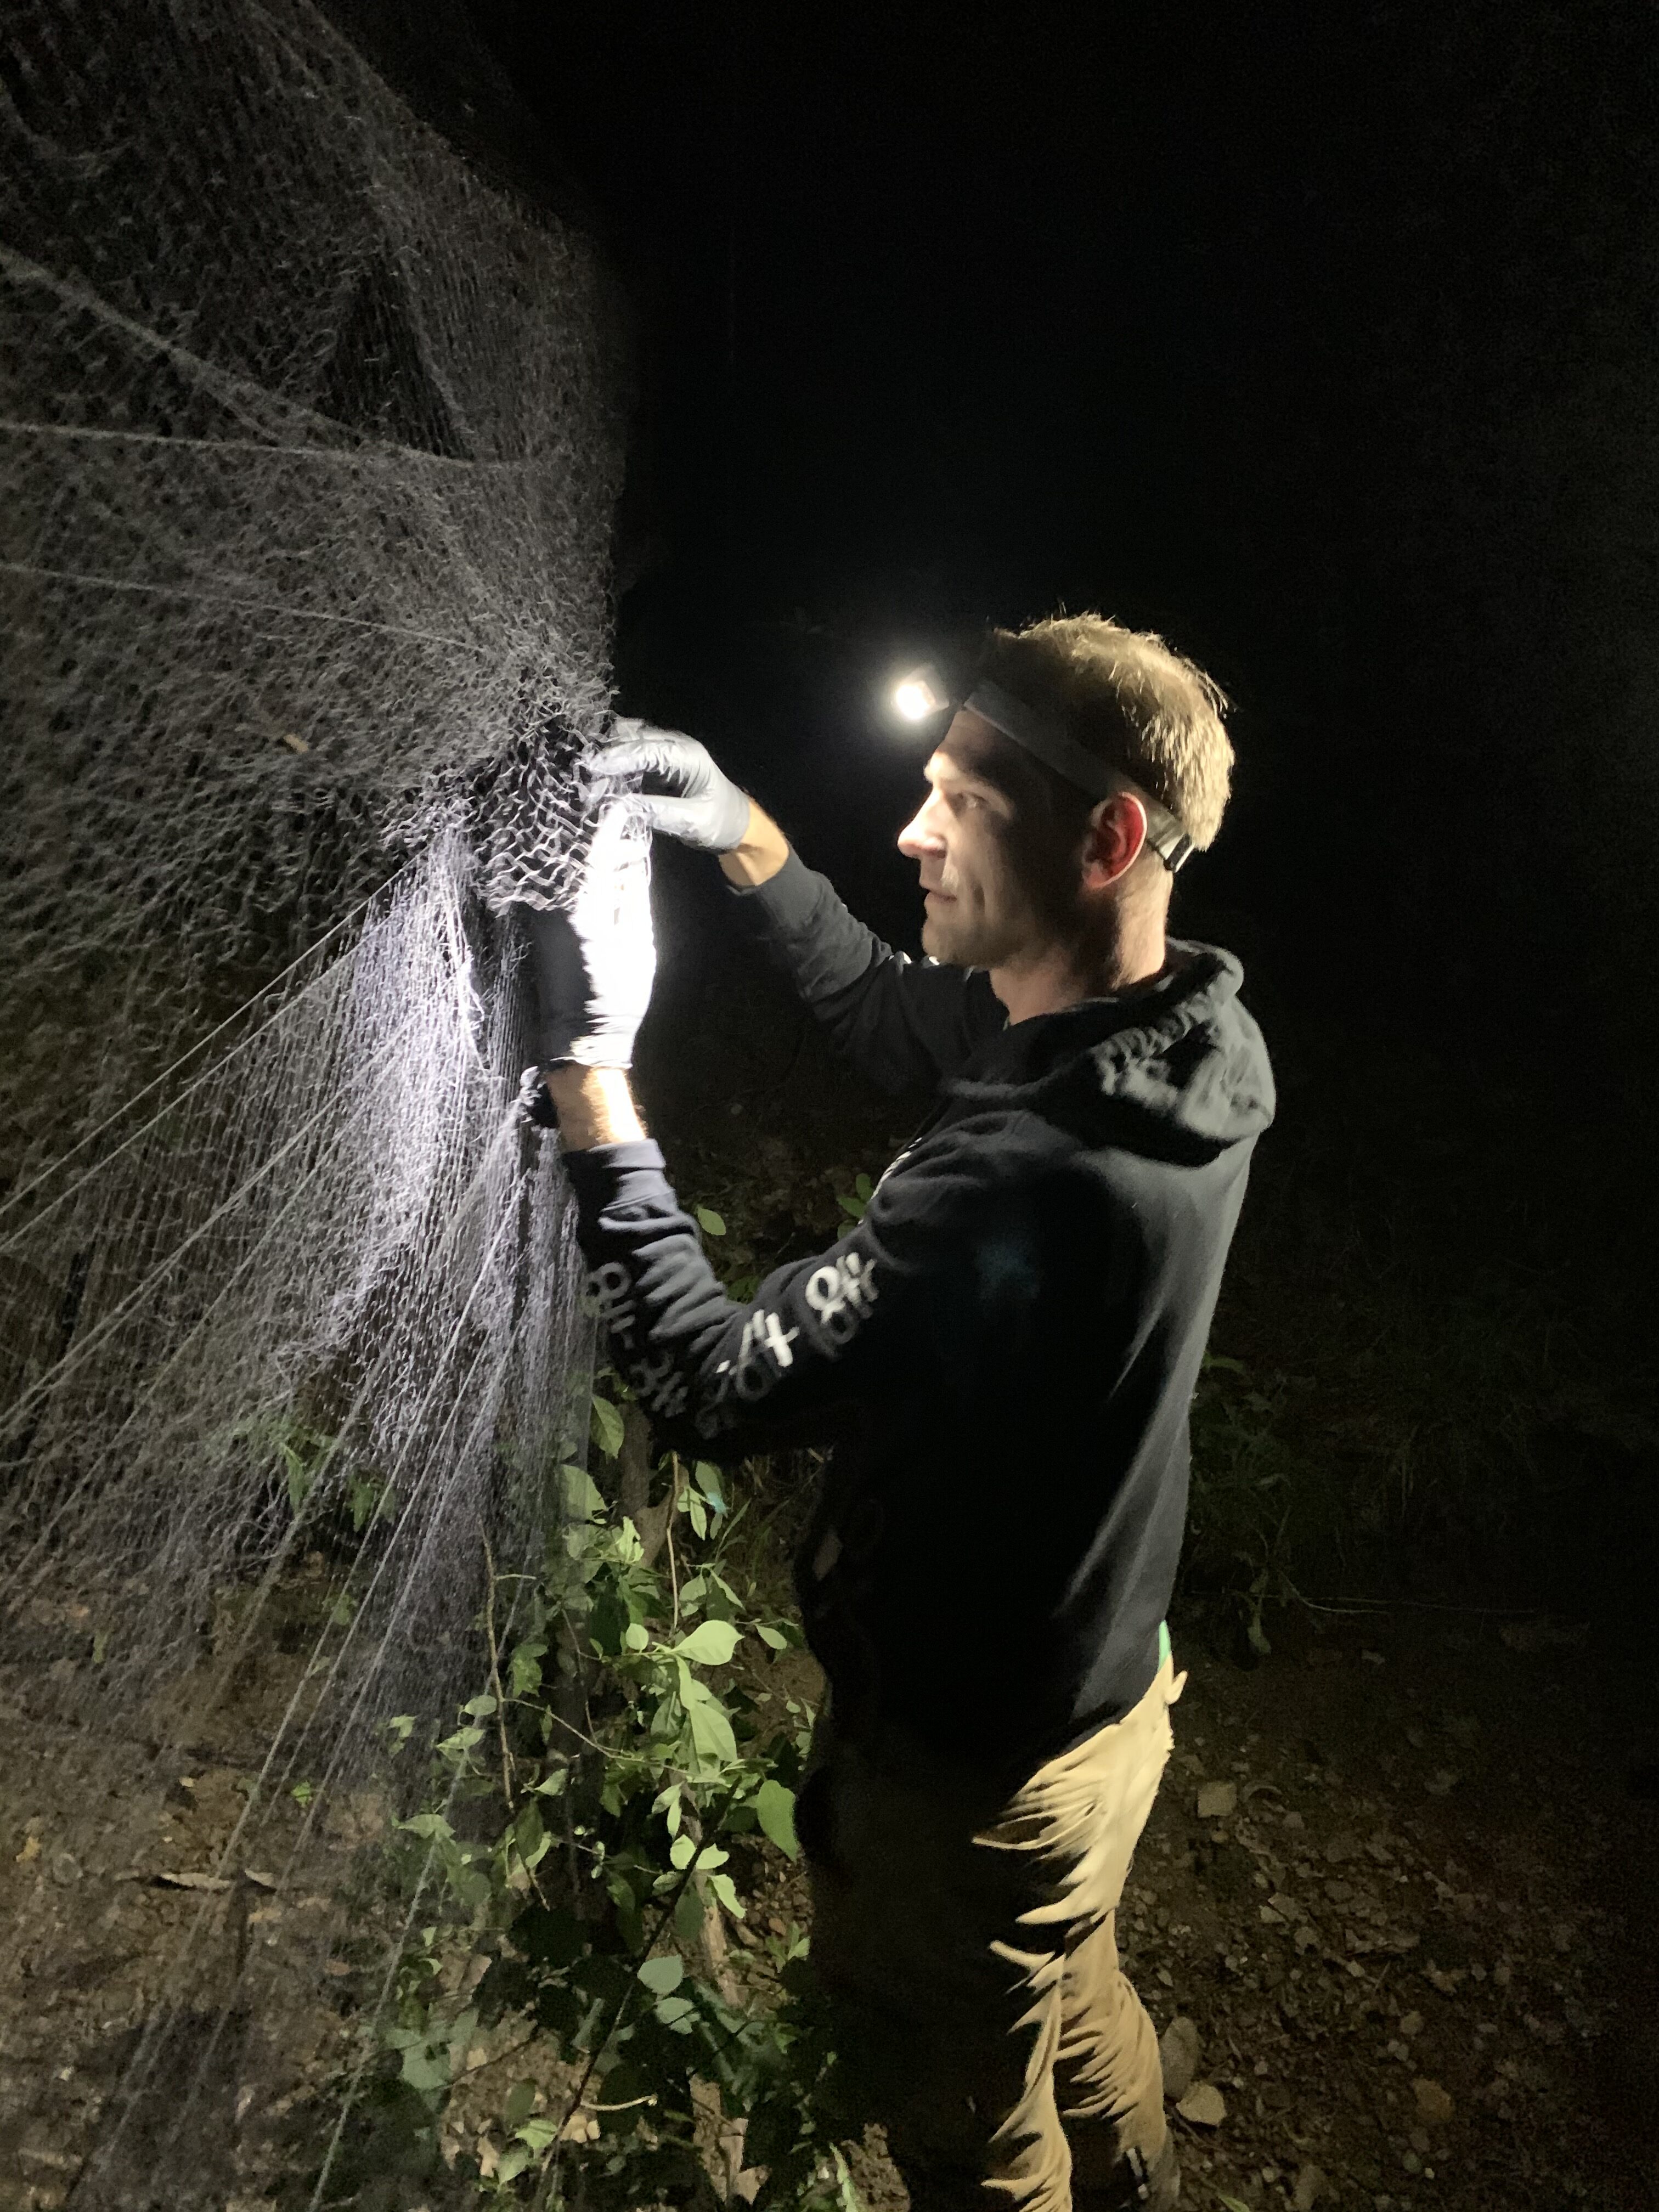 HZW is pleased to announce the acquisition of federally permitted bat ecologist Benjamin Schuplin